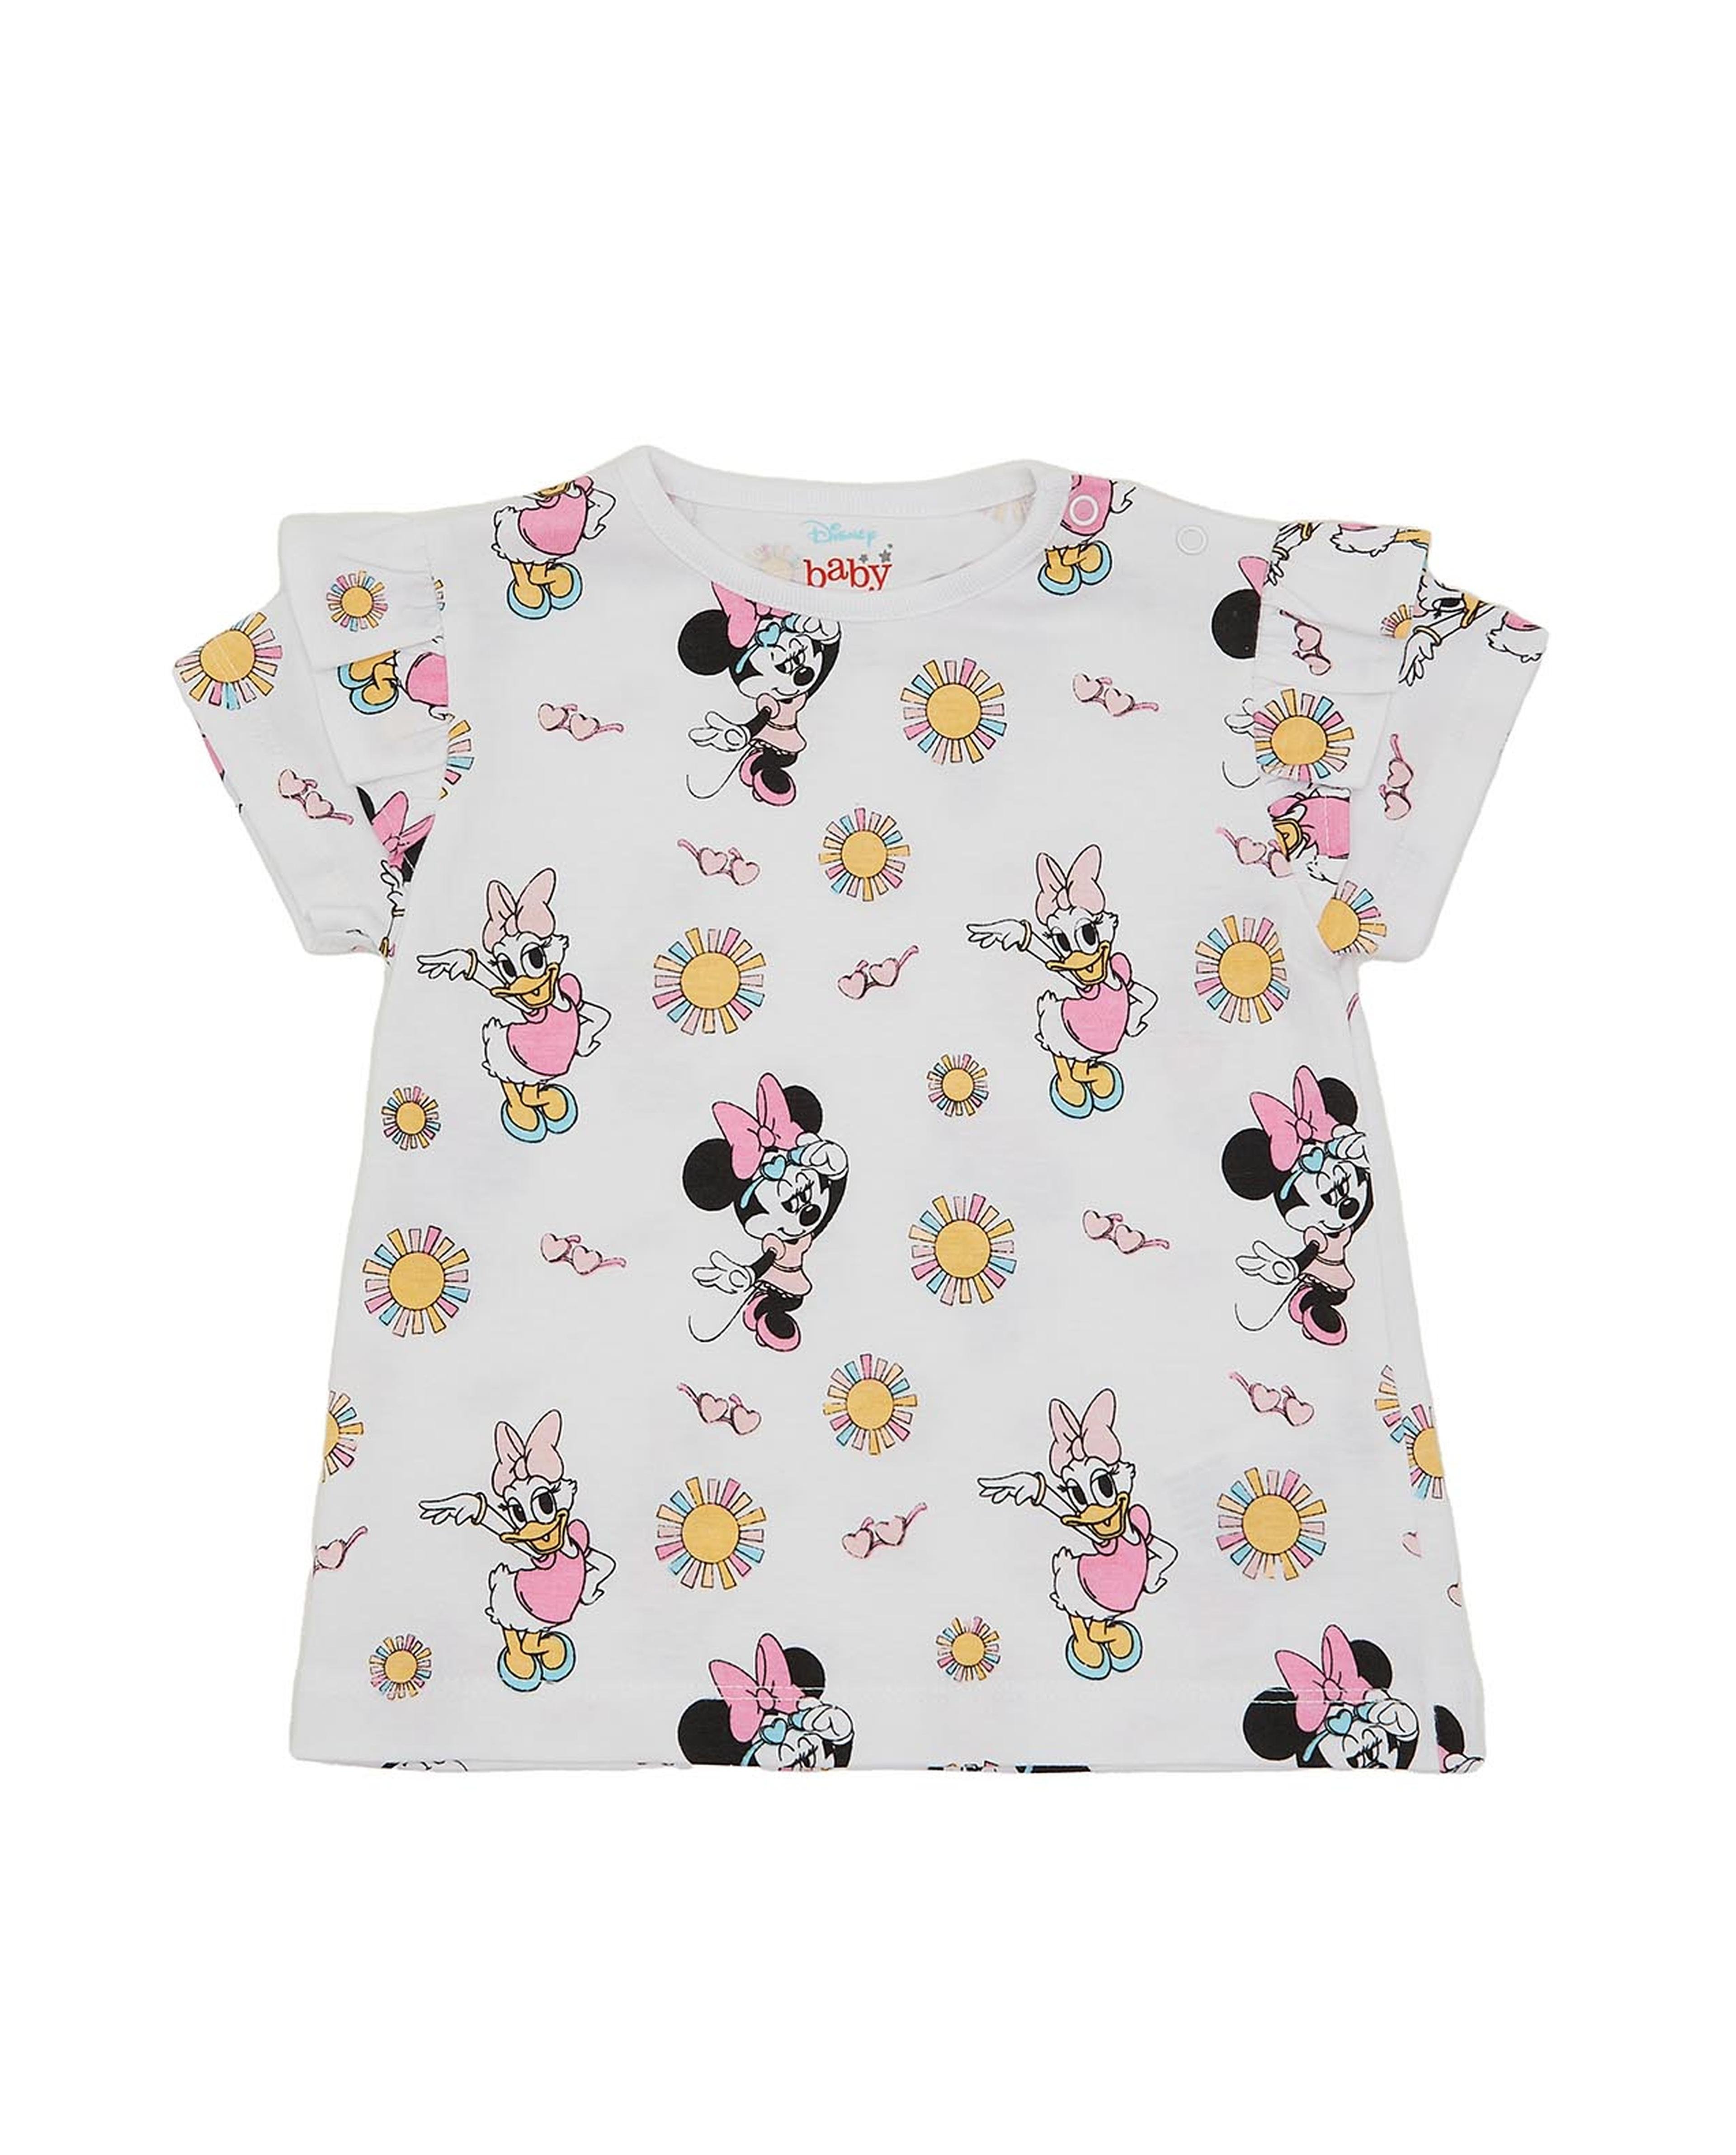 Pack of 2 Minnie Mouse Printed Tops with Short Sleeves